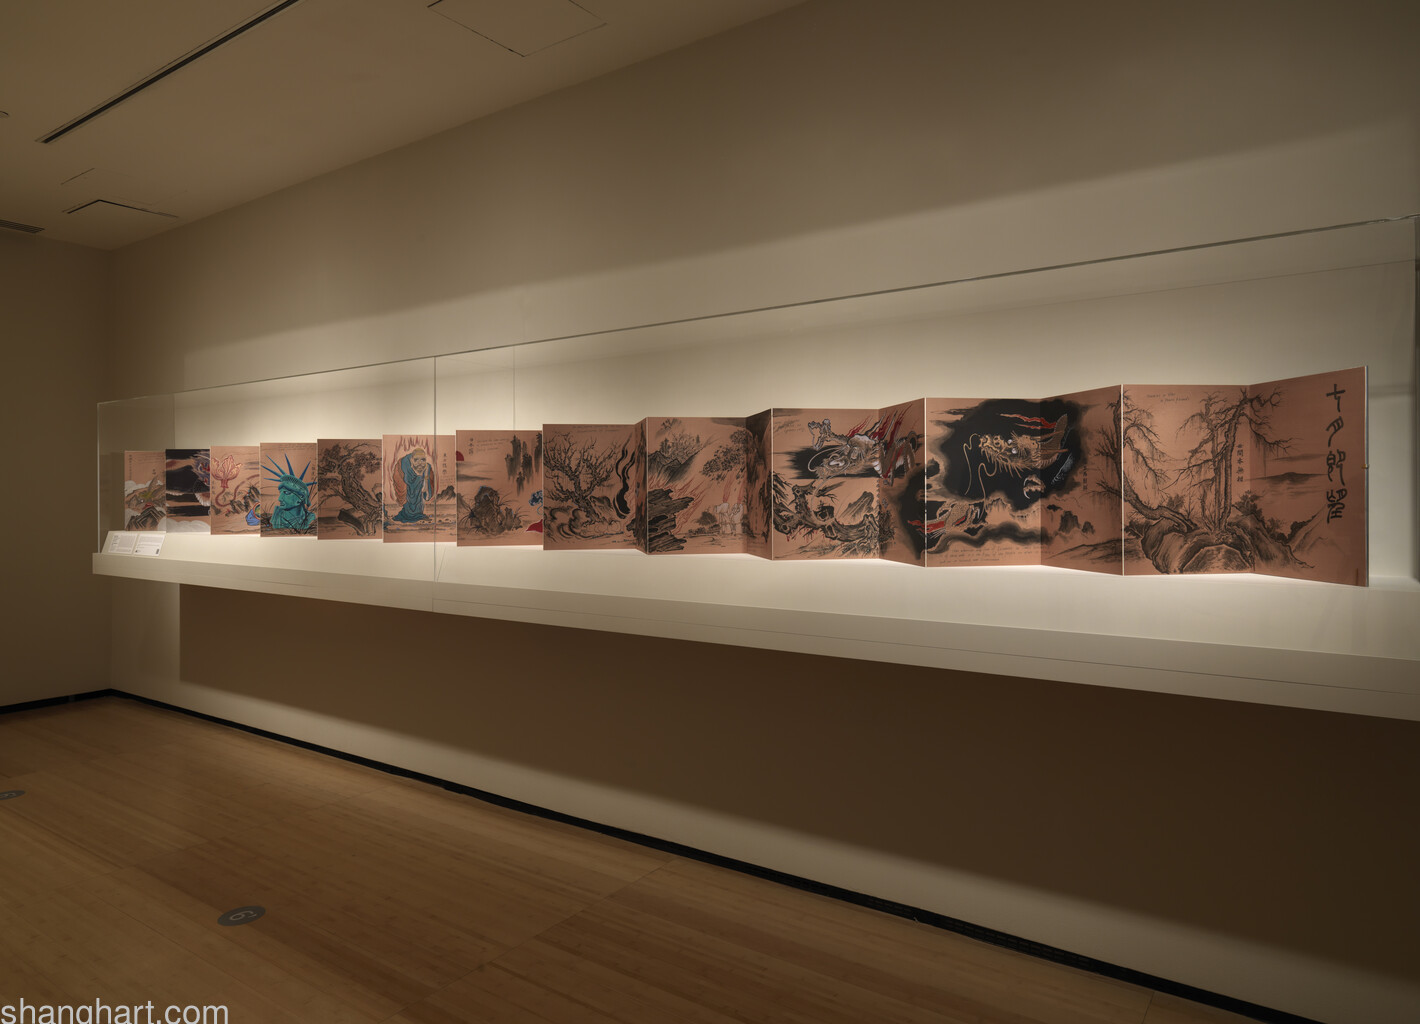 Installation view of Asia Society Triennial: “We Do Not Dream Alone” at Asia Society Museum, New York, October 27, 2020–June 27, 2021. Photograph: Bruce M. White, 2020, courtesy of Asia Society